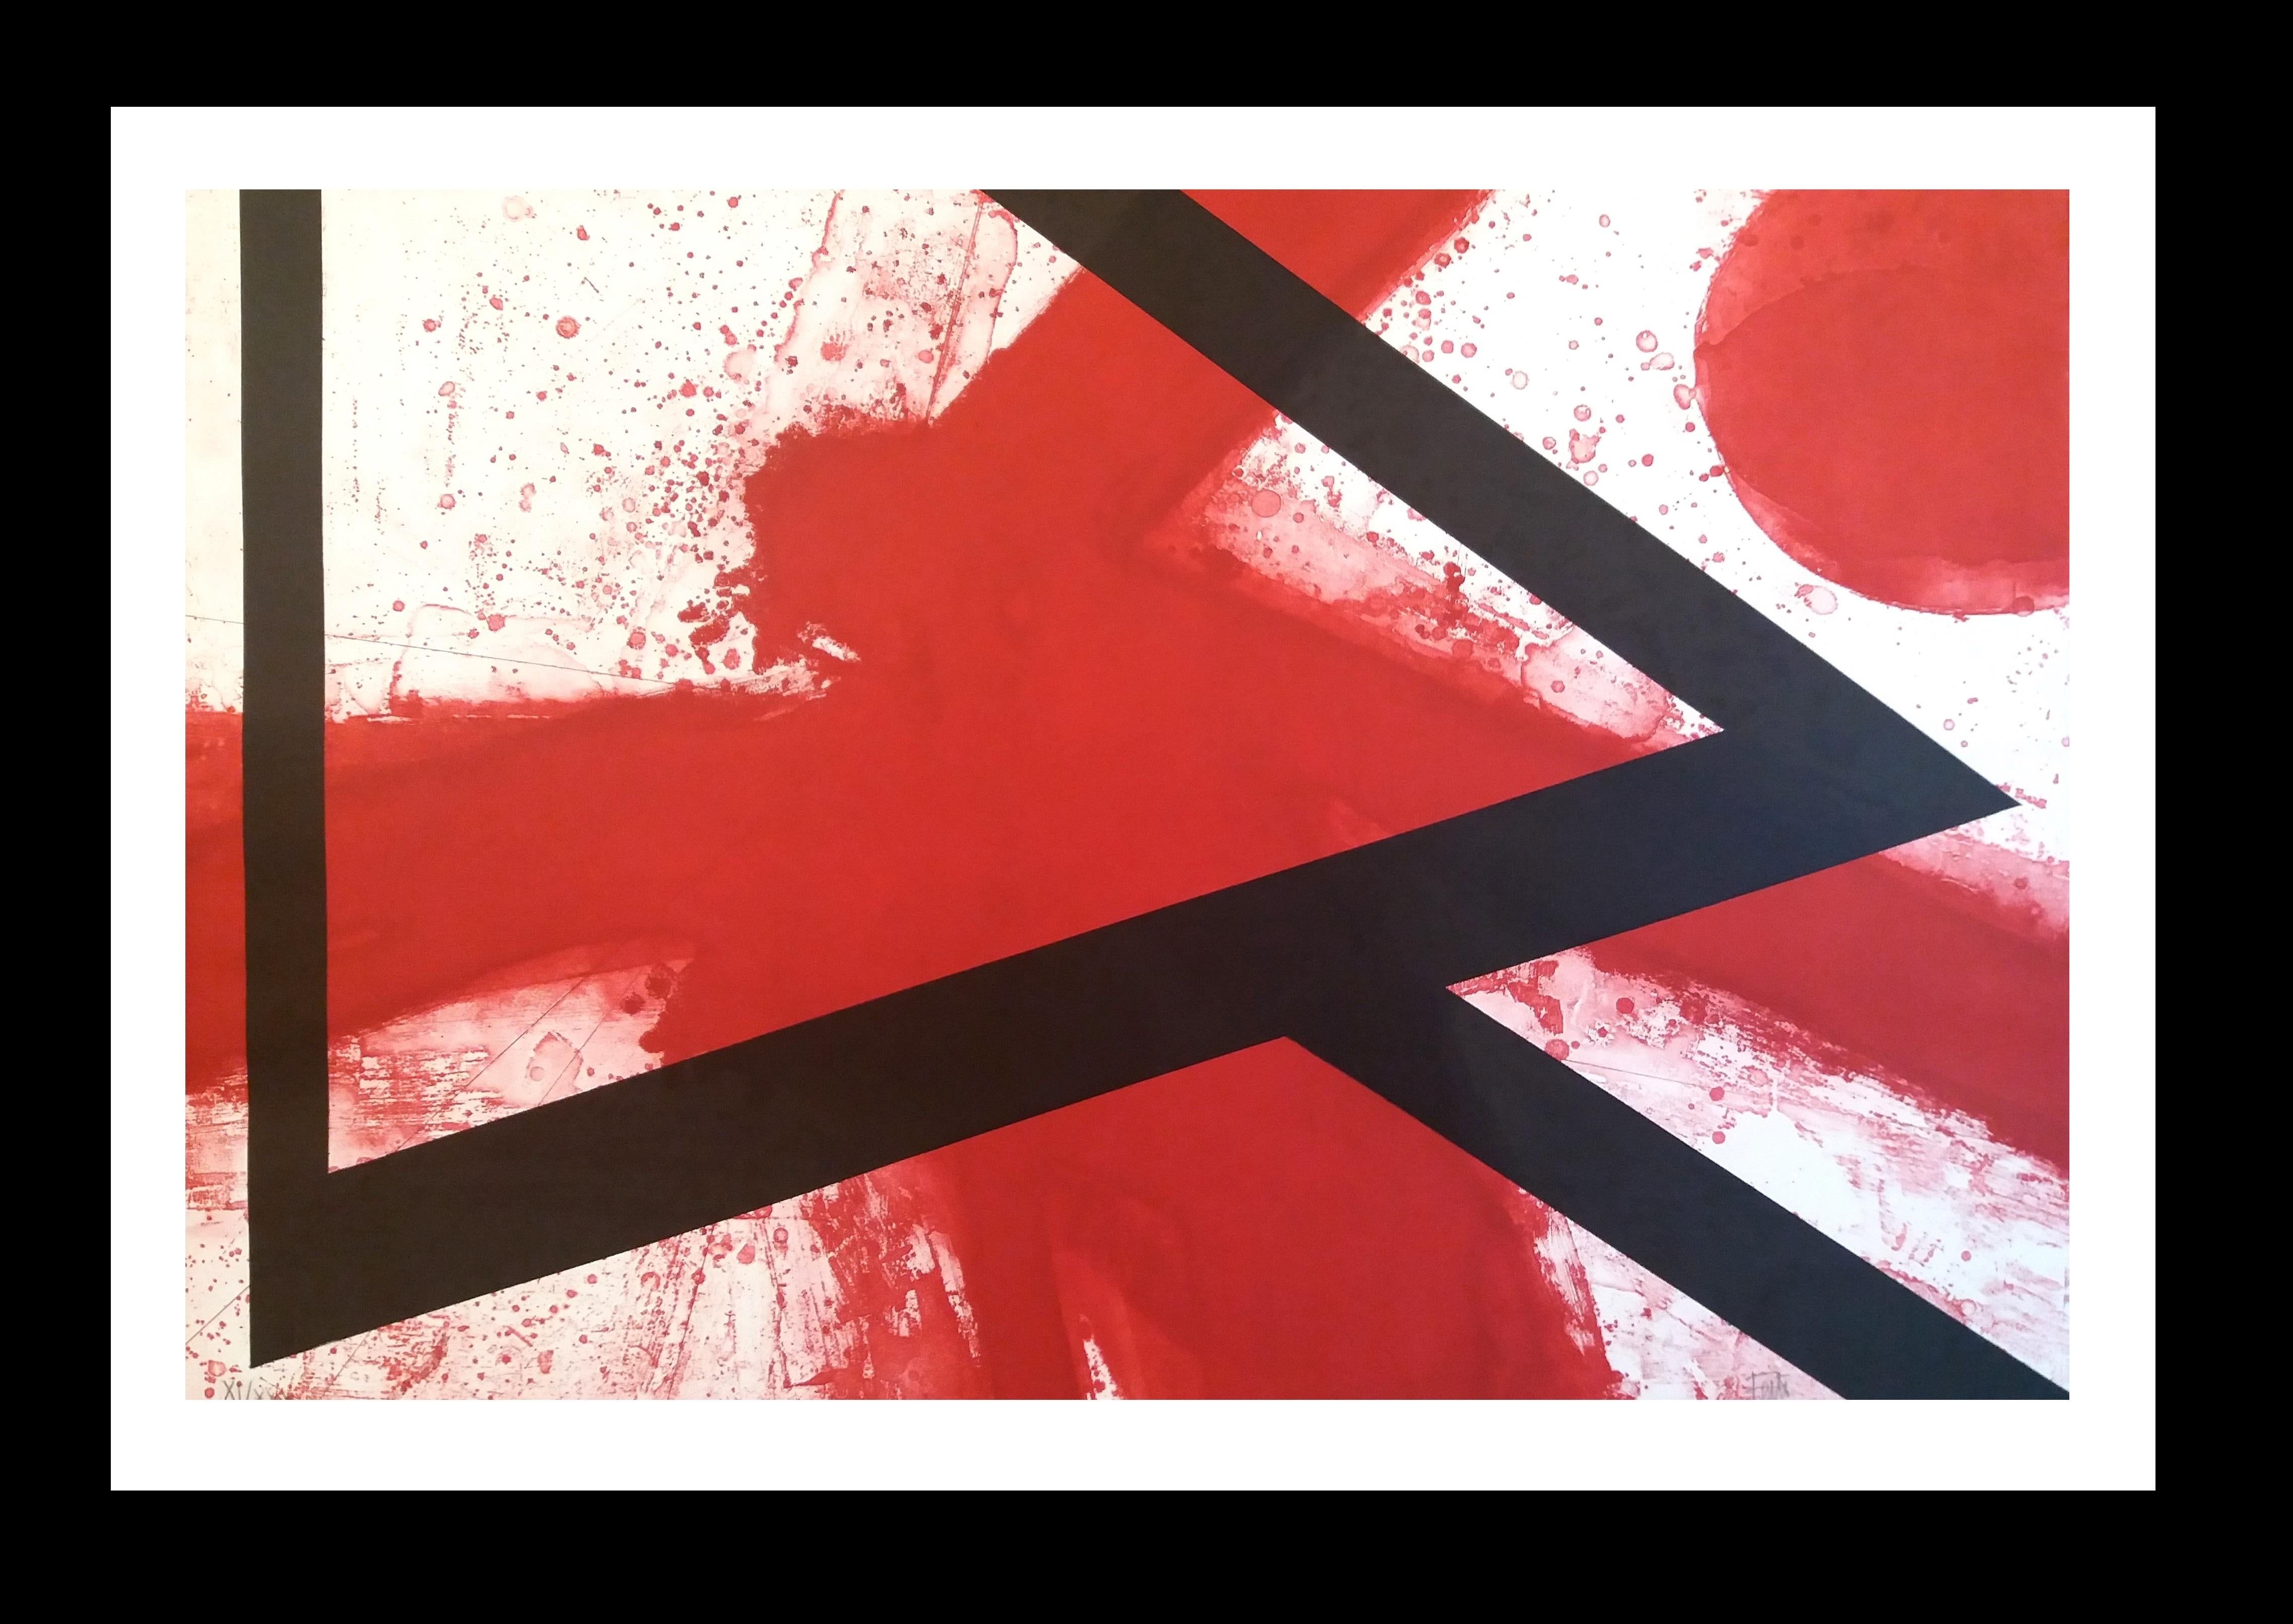 Luis Feito López Abstract Painting - Feito Abstract. Red White  Black  limited edition painting